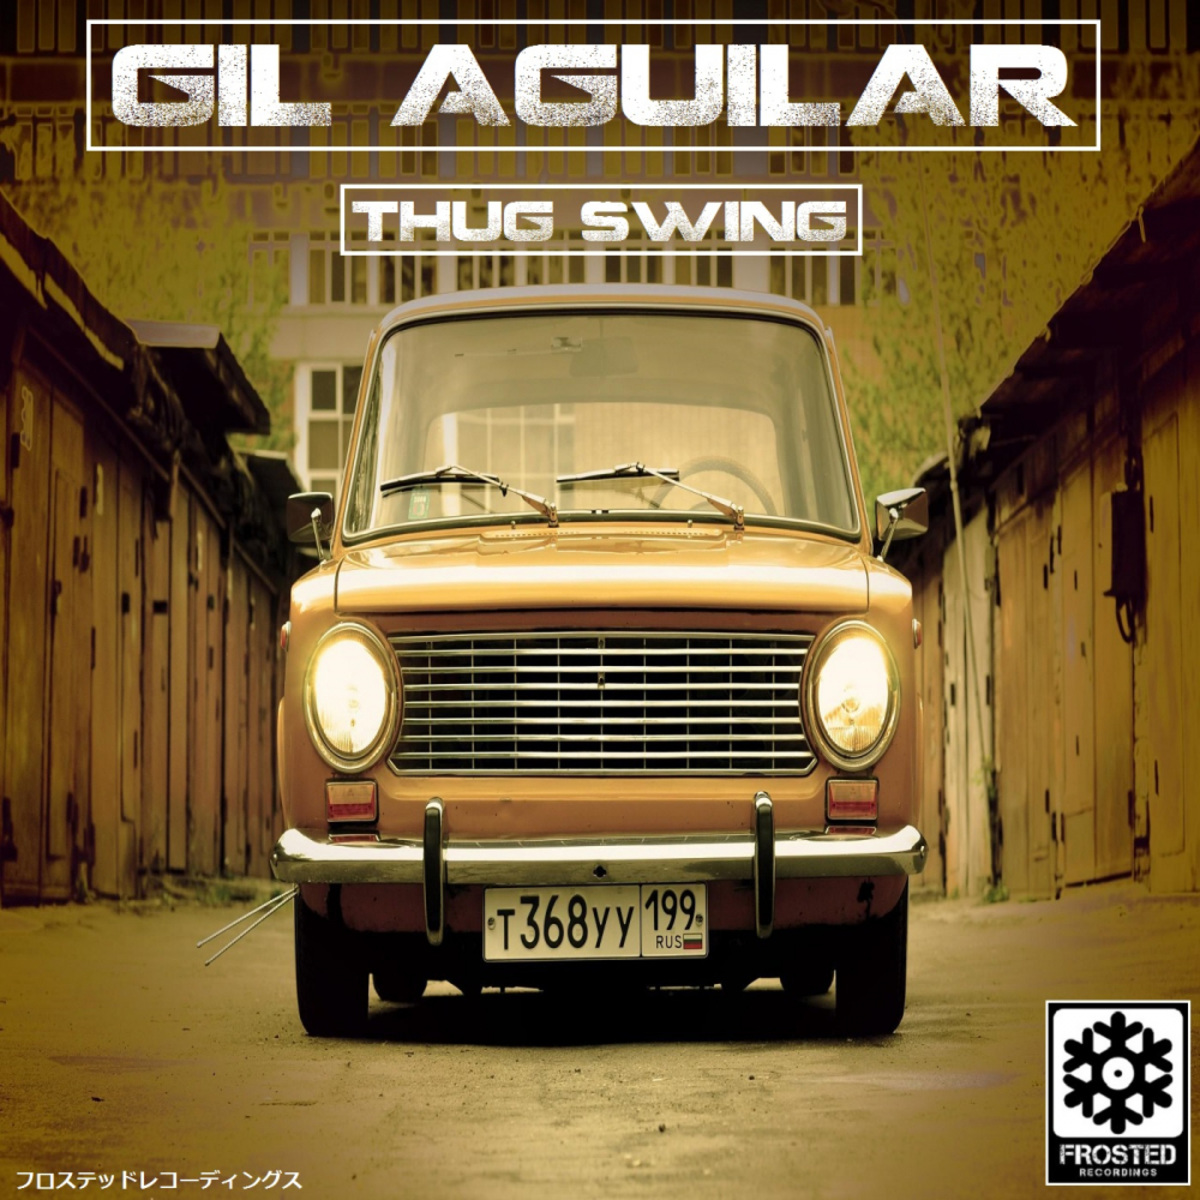 Gil Aguilar - Thug Swing / Frosted Recordings